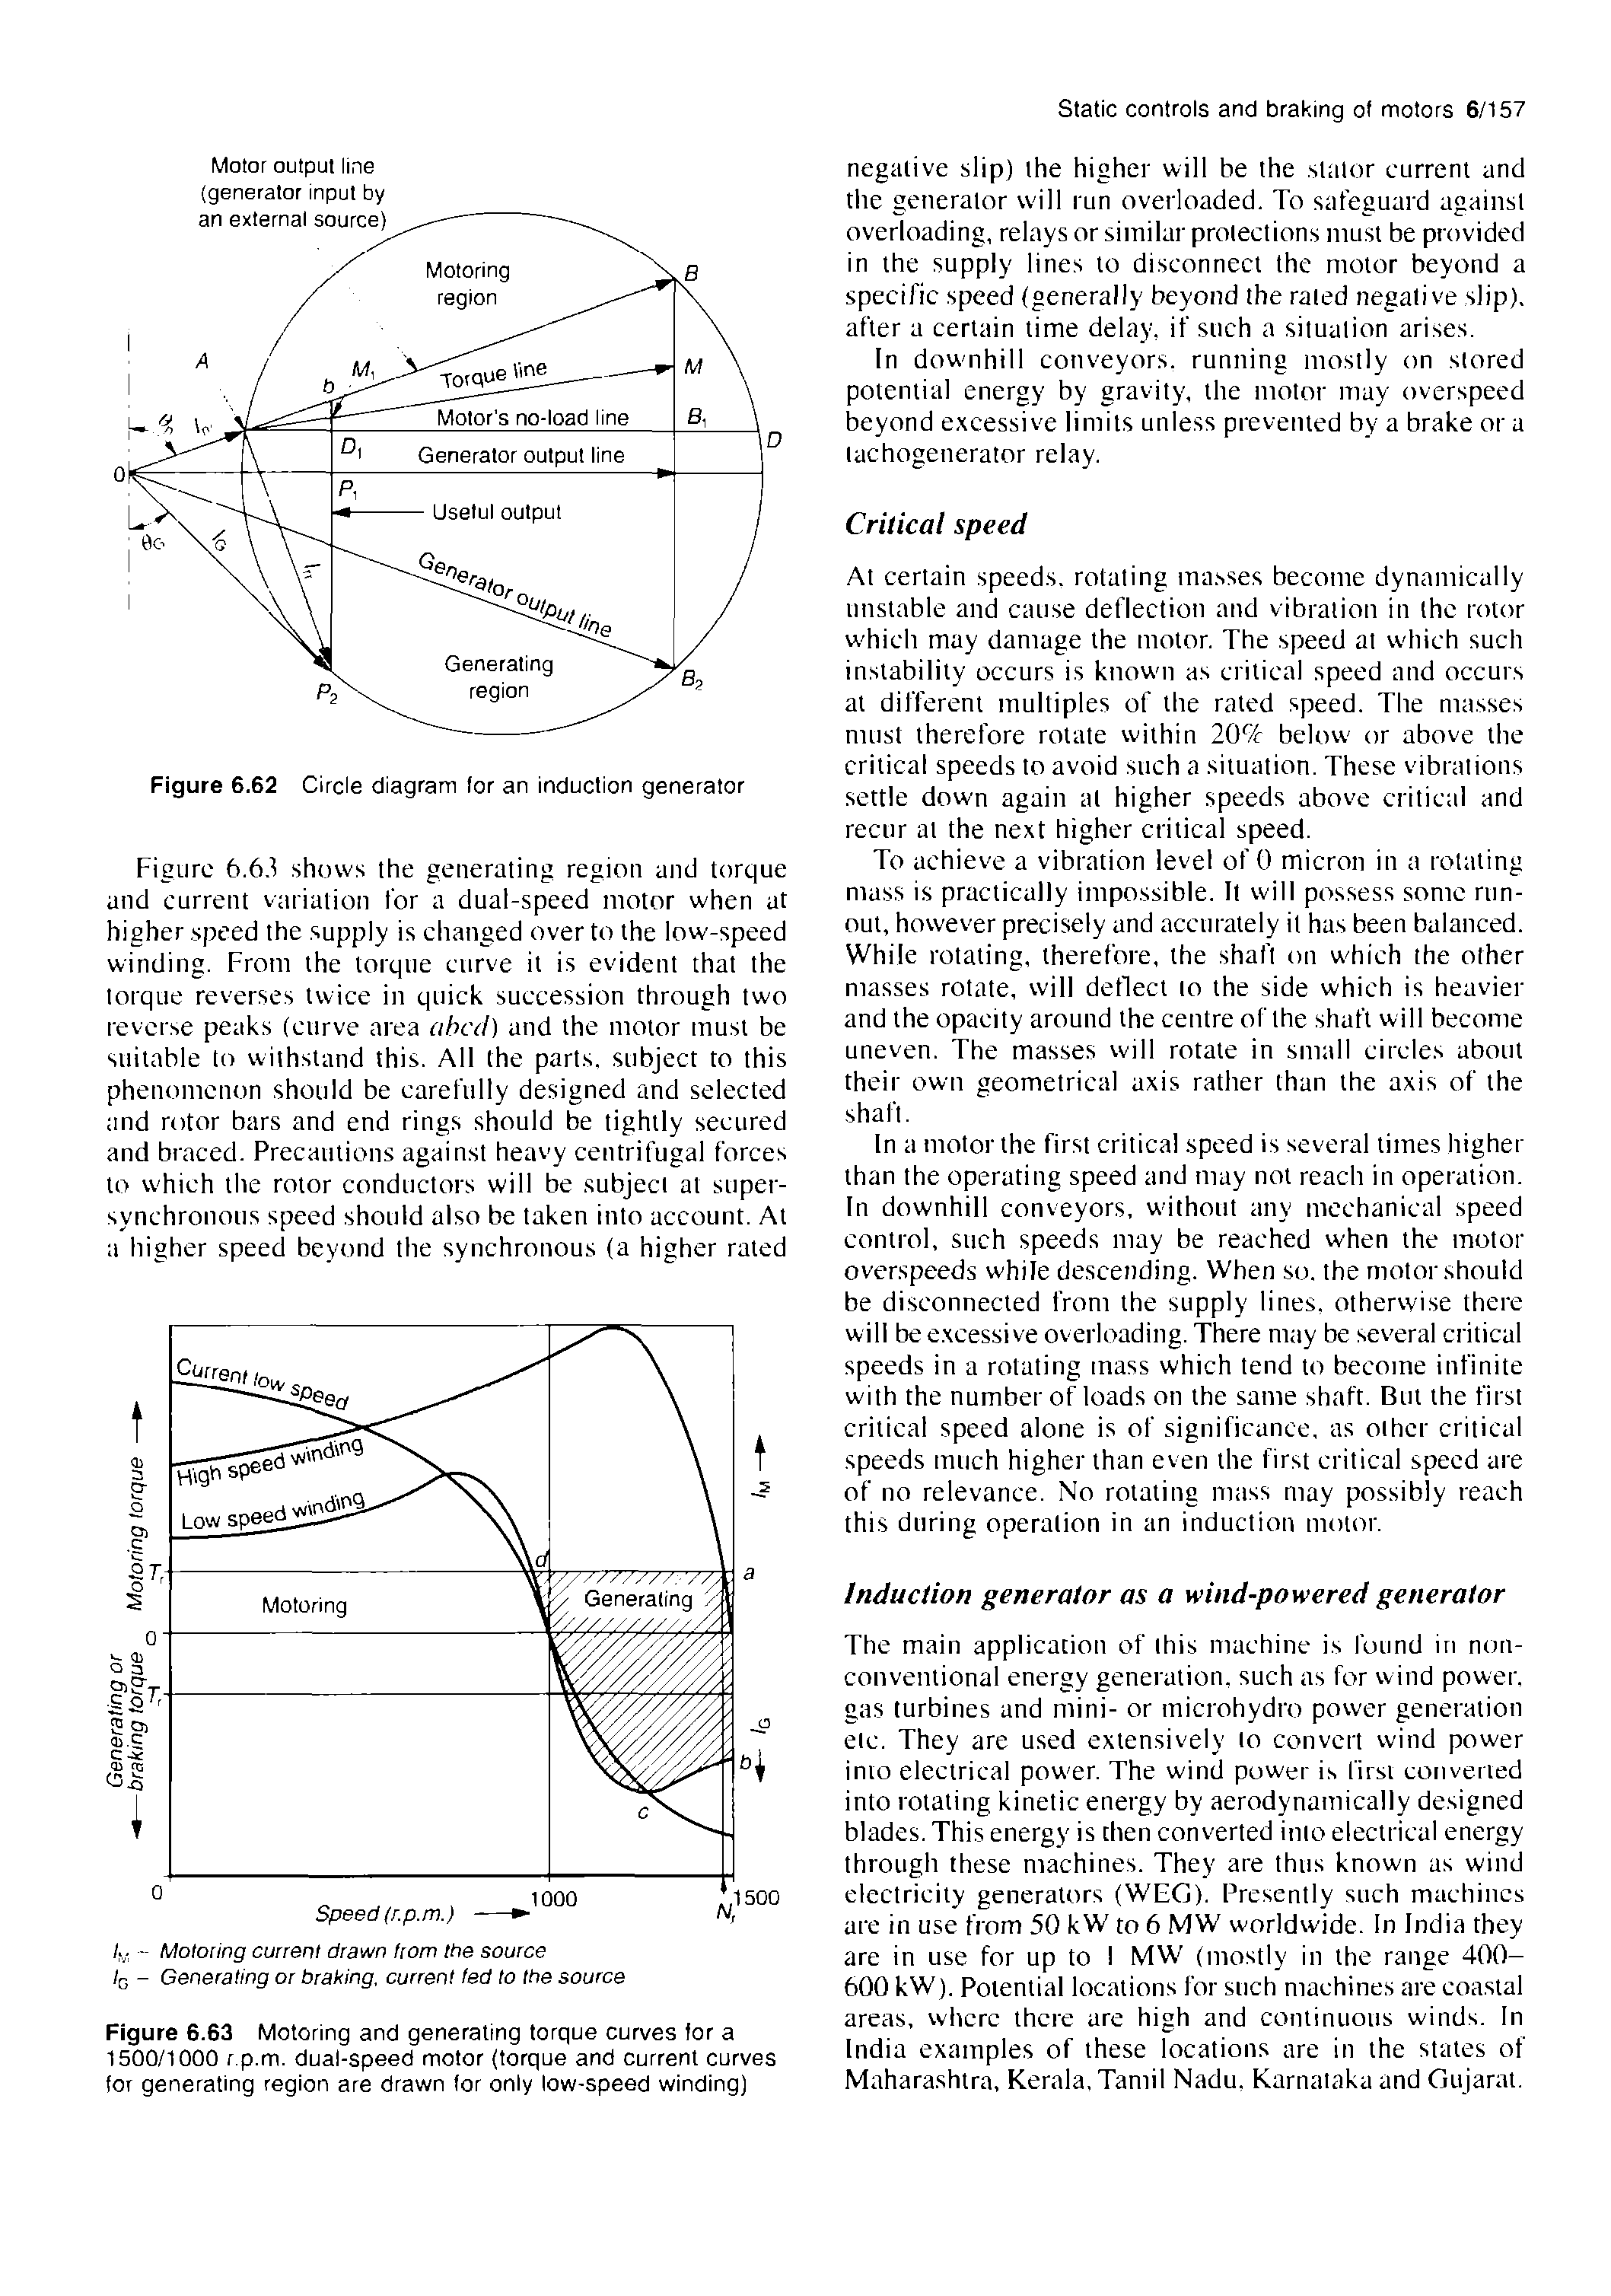 Figure 6.63 Motoring and generating torque curves for a 1500/1000 r.p.m. dual-speed motor (torque and current curves for generating region are drawn for only low-speed winding)...